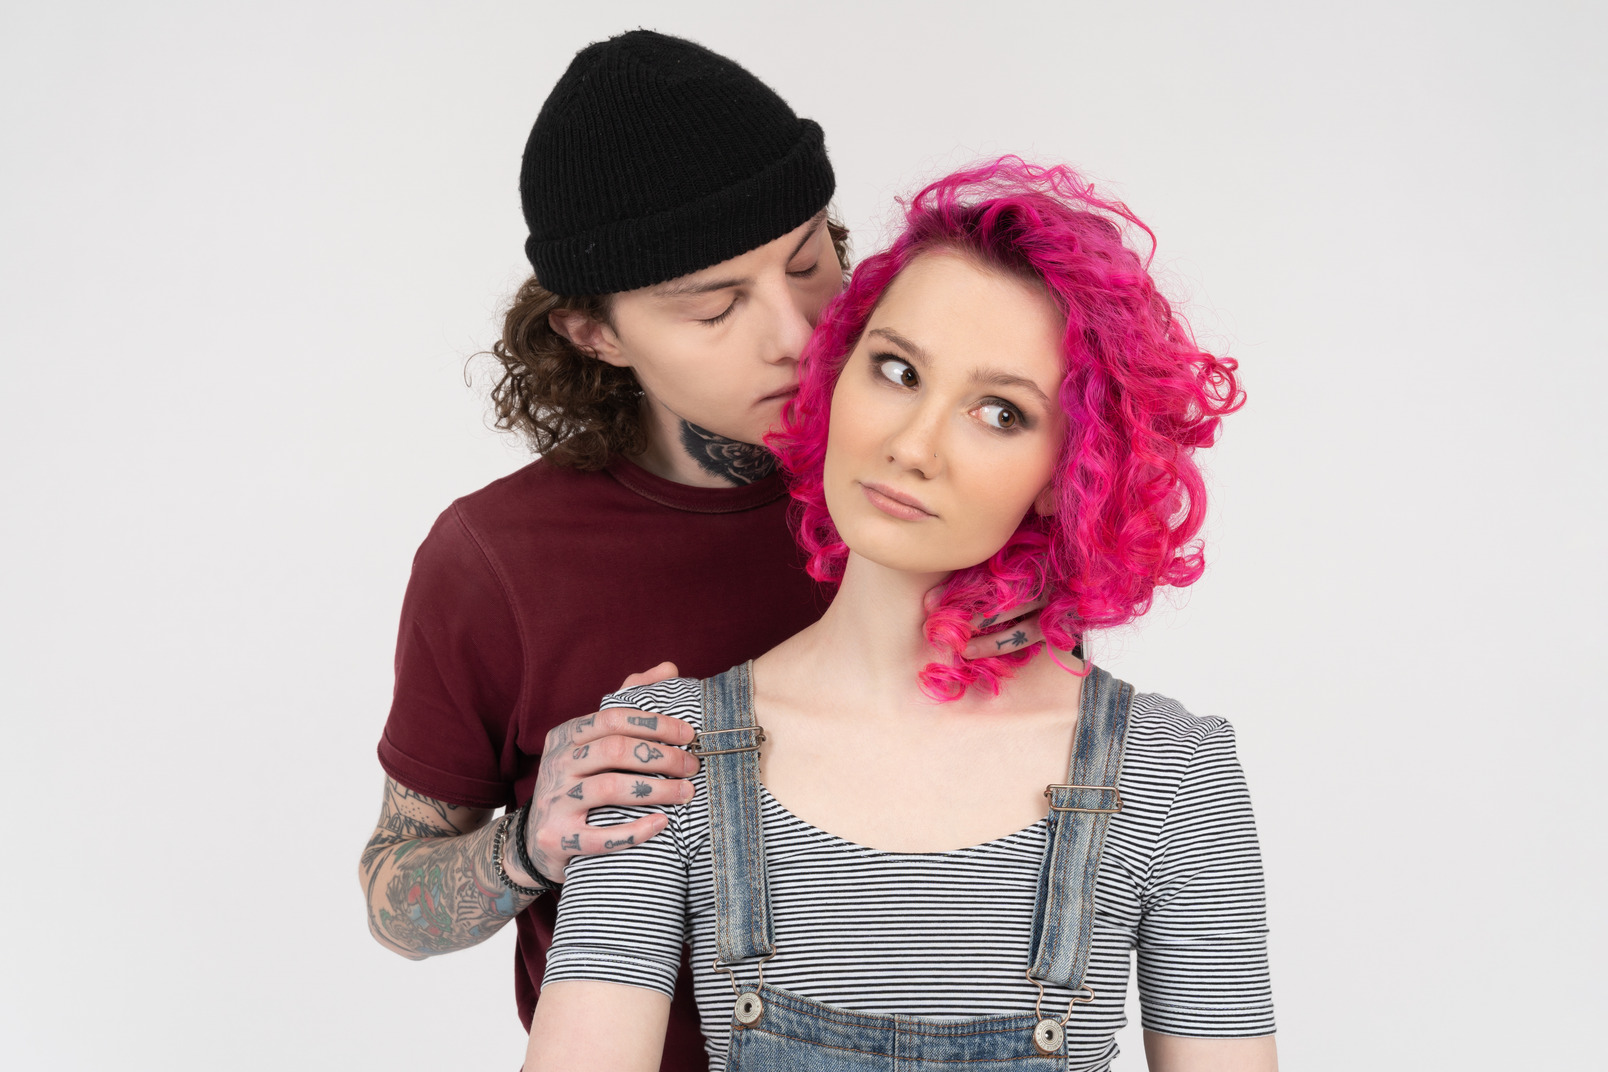 Young man standing behind his girlfriend kisses her cheek